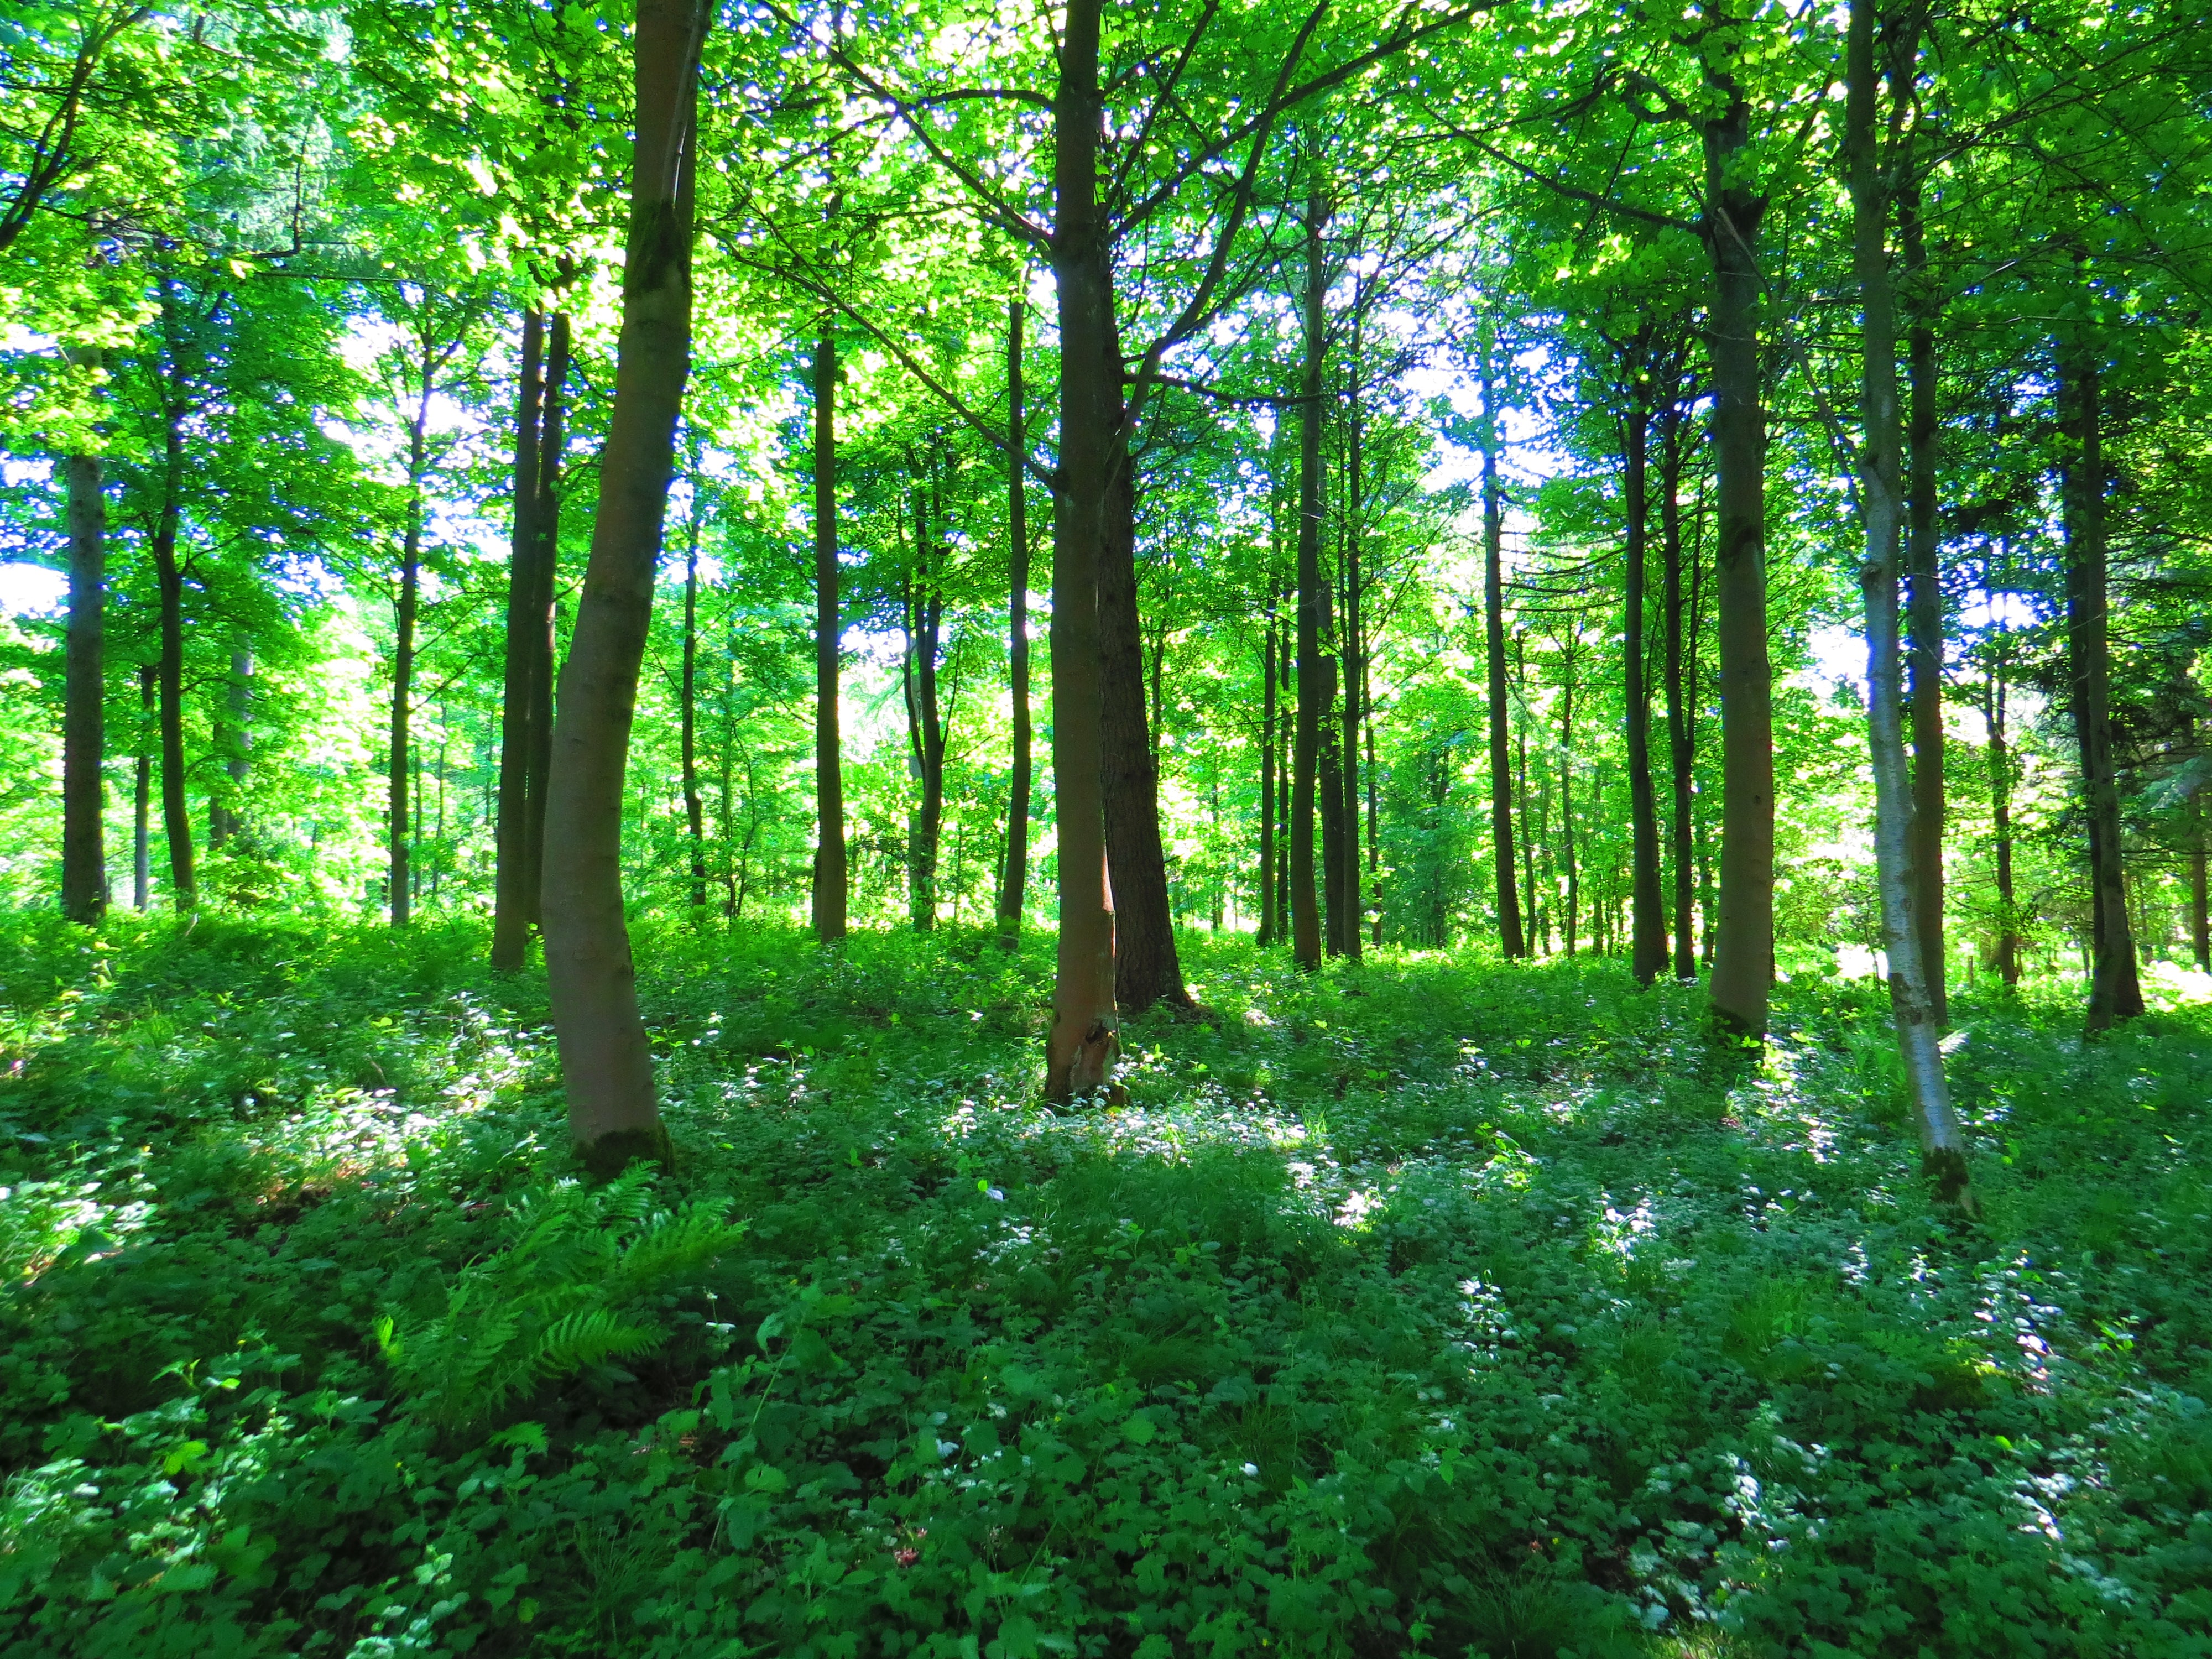 Green trees in a forest